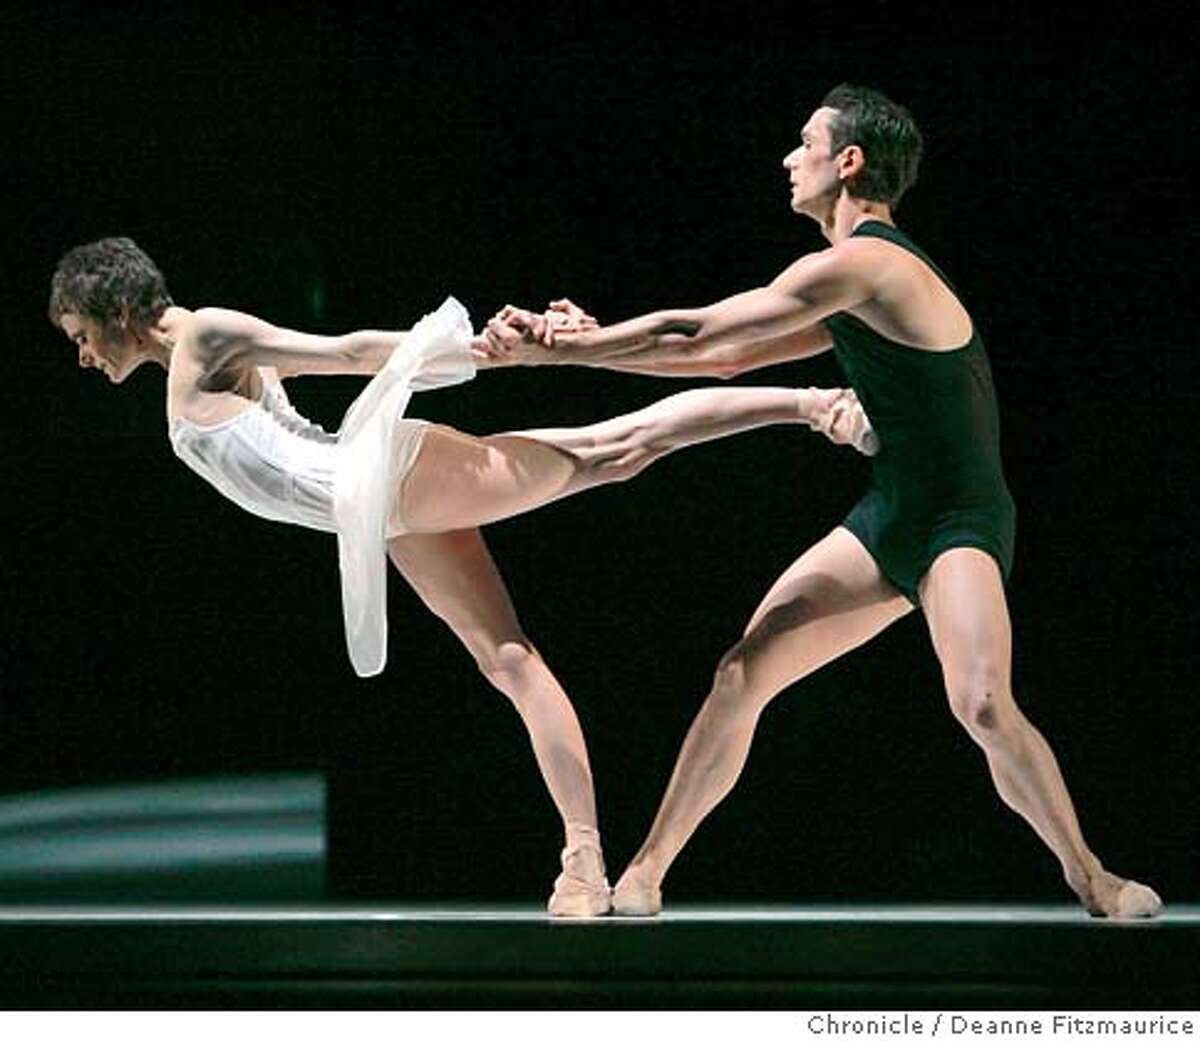 Muriel Maffre dances with Damian Smith as San Francisco Ballet performs Reflections in Program 4, a piece by choreographer Yuri Possokhov. Deanne Fitzmaurice / The Chronicle